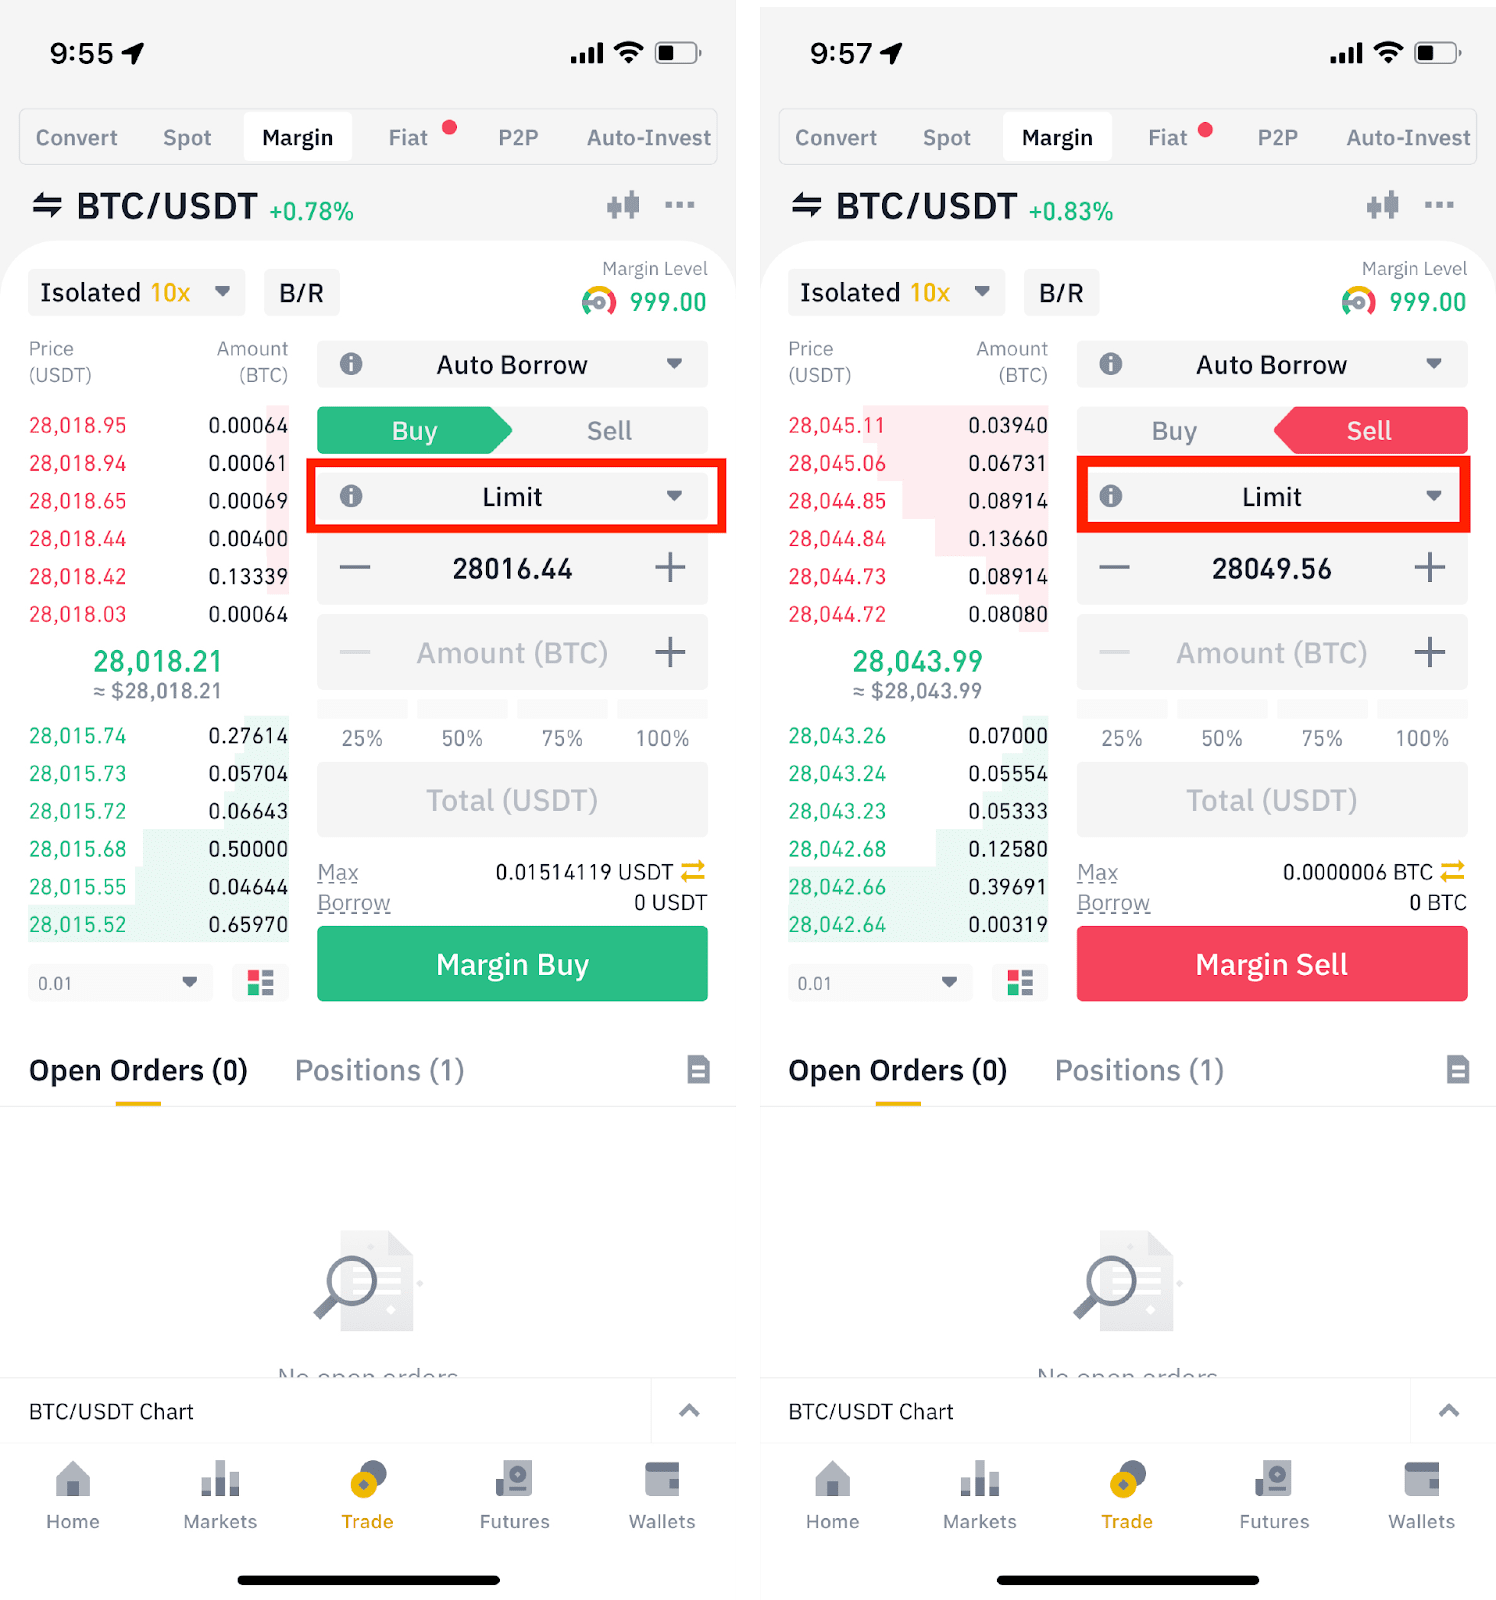 Anyone have any CCXT code examples for a short sell margin trade on Binance?